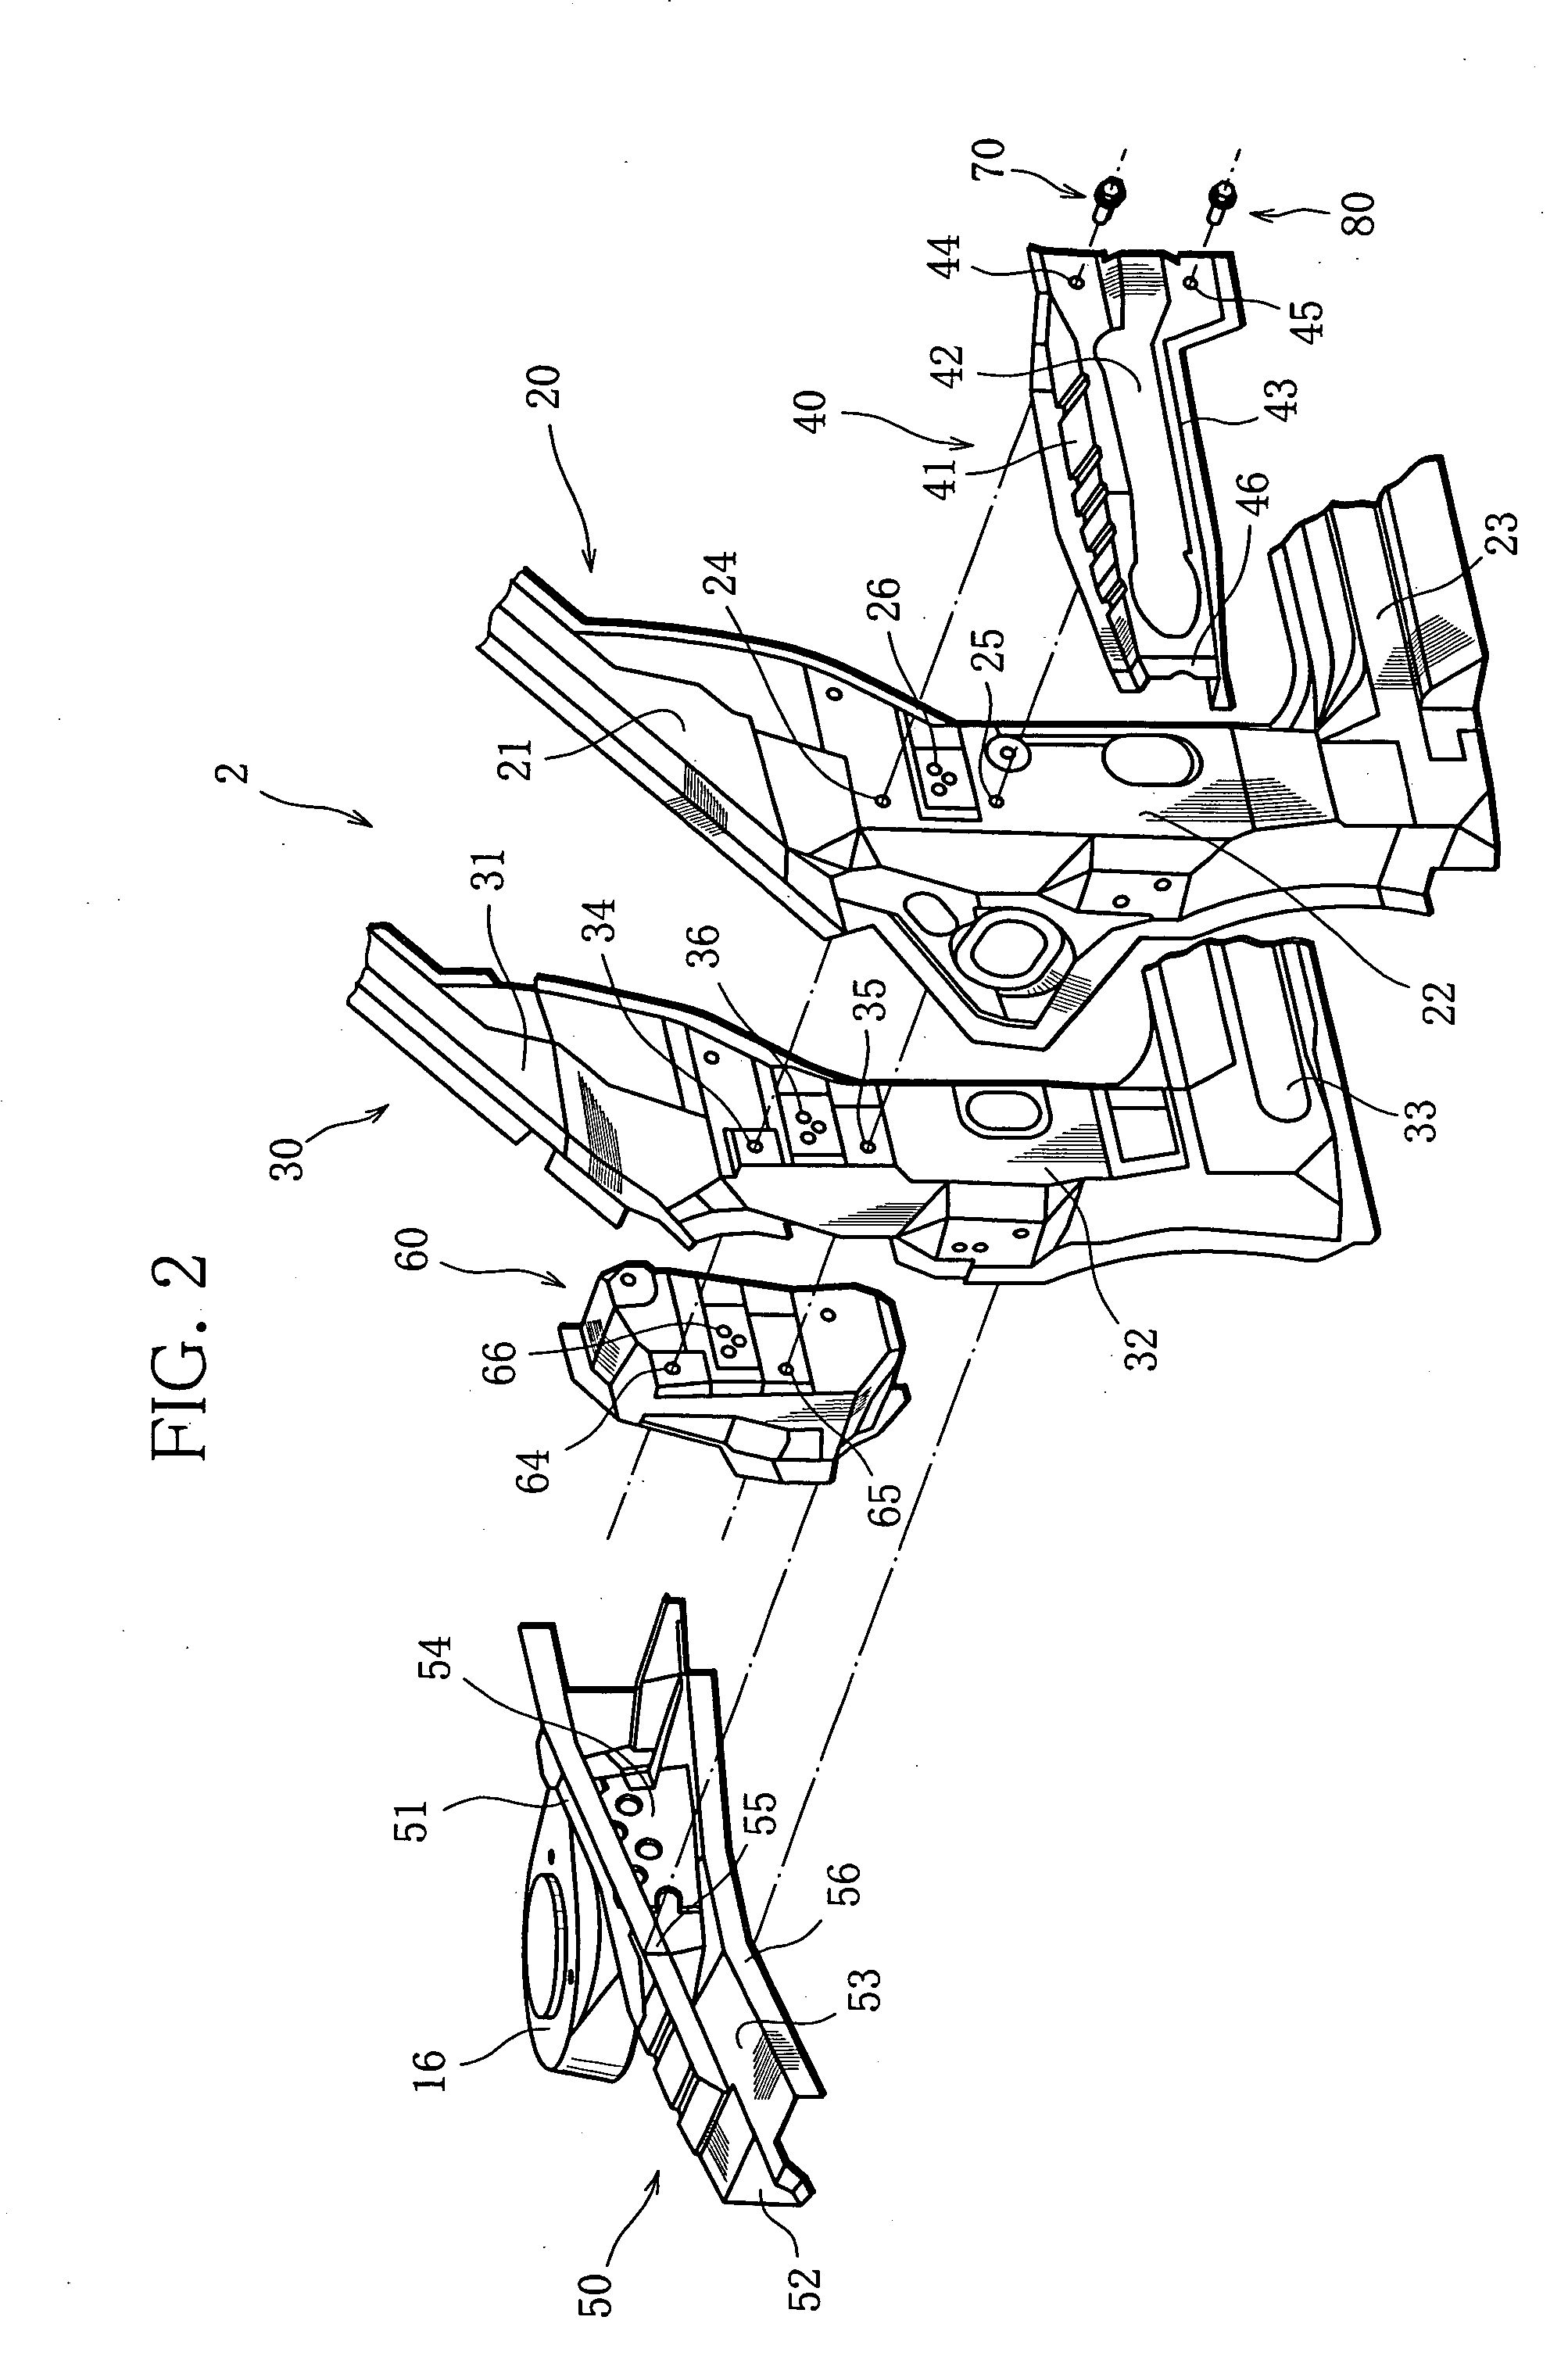 Vehicle body frame structure